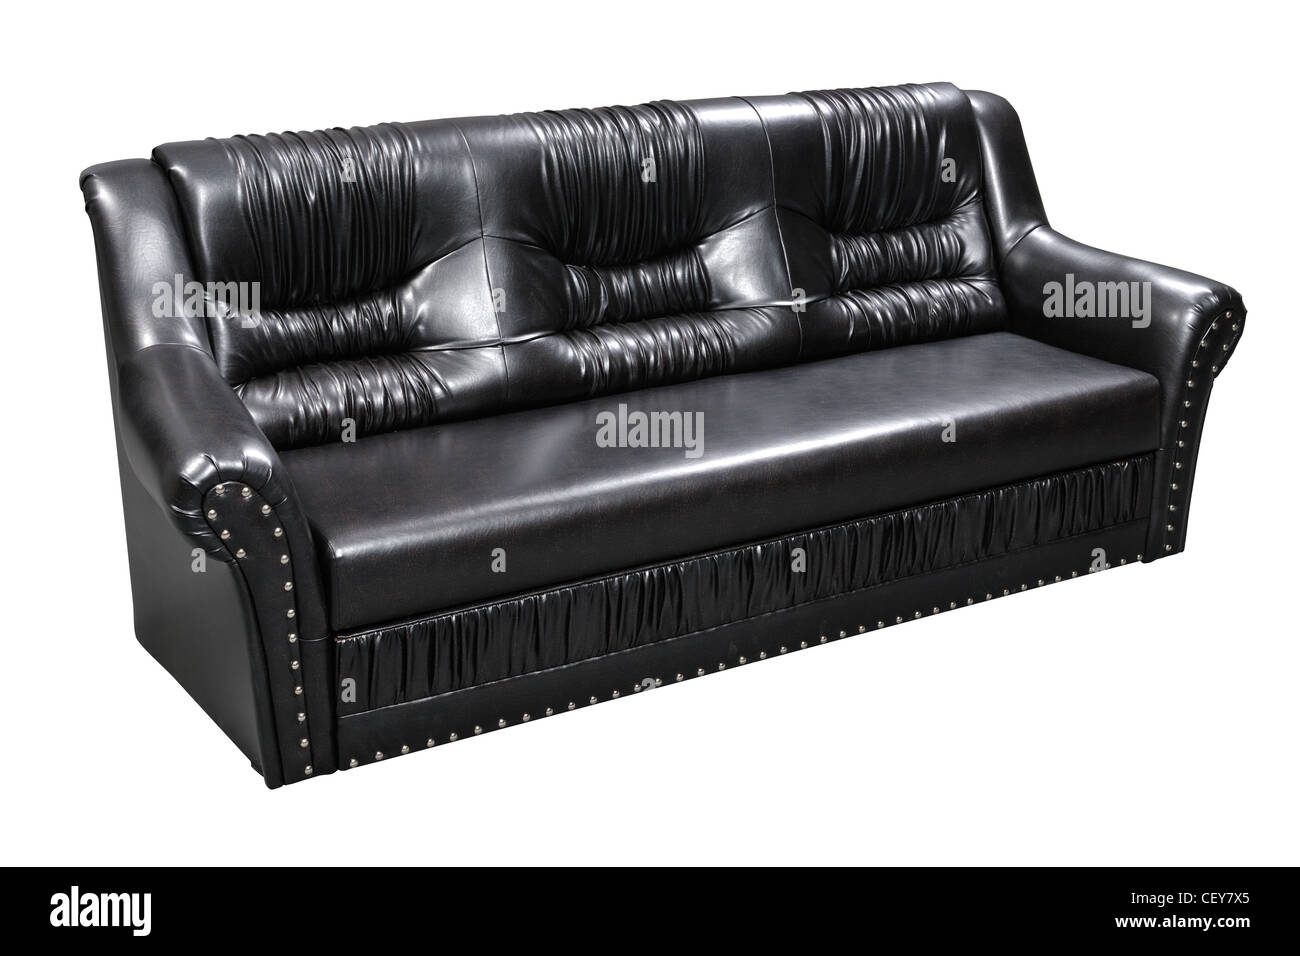 Modern black furniture, soft sofa-bed isolated on white with clipping path included Stock Photo